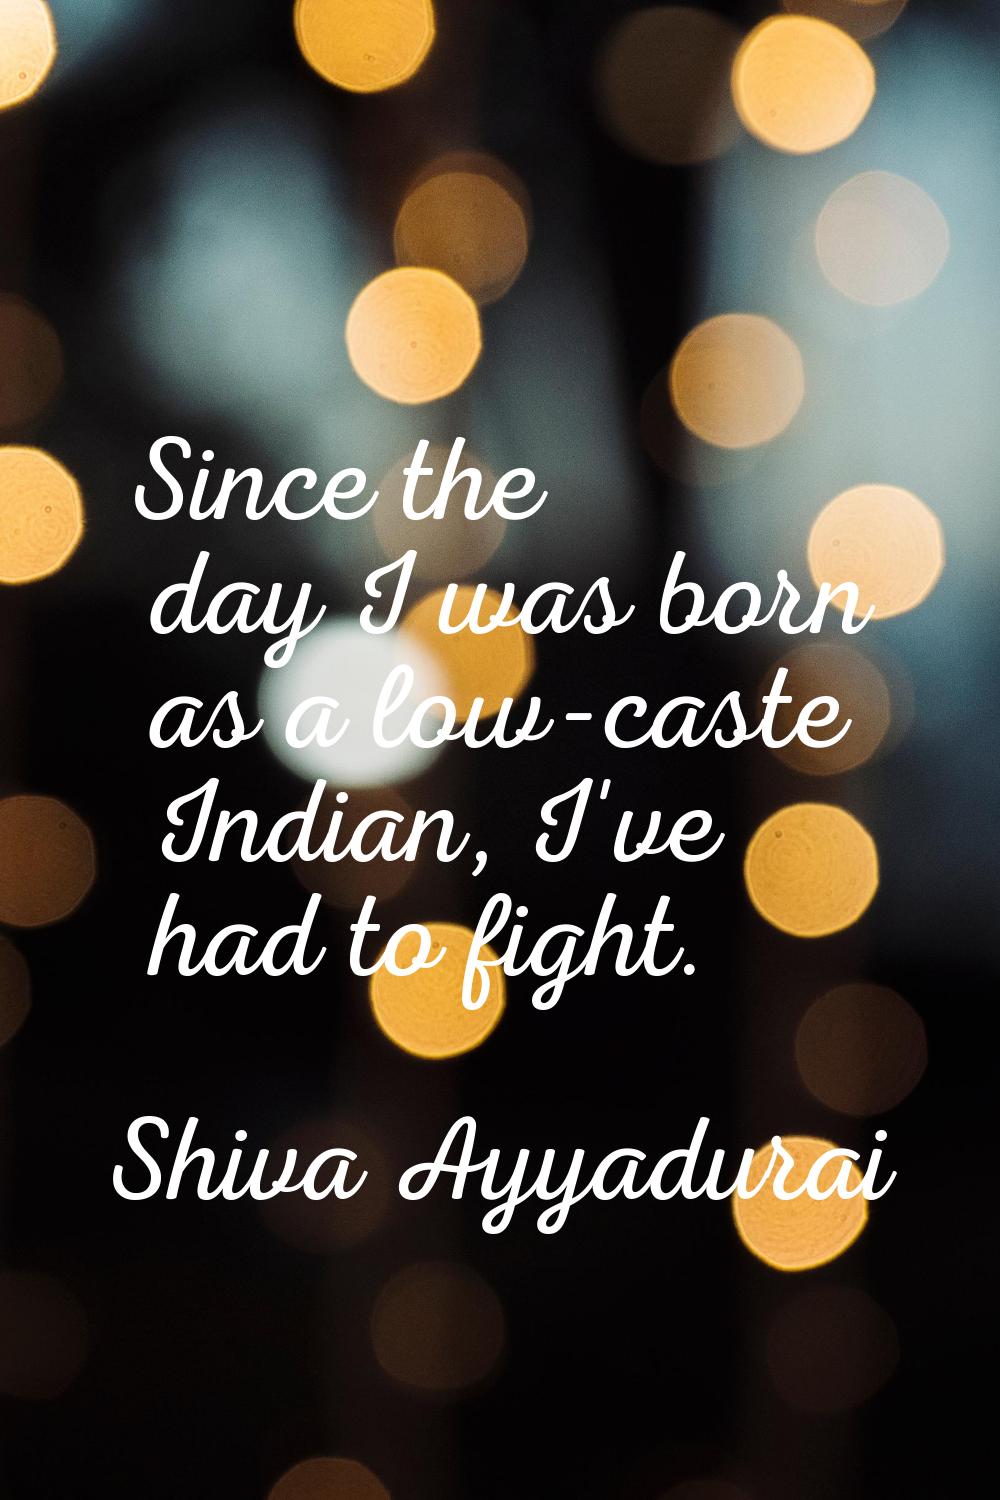 Since the day I was born as a low-caste Indian, I've had to fight.